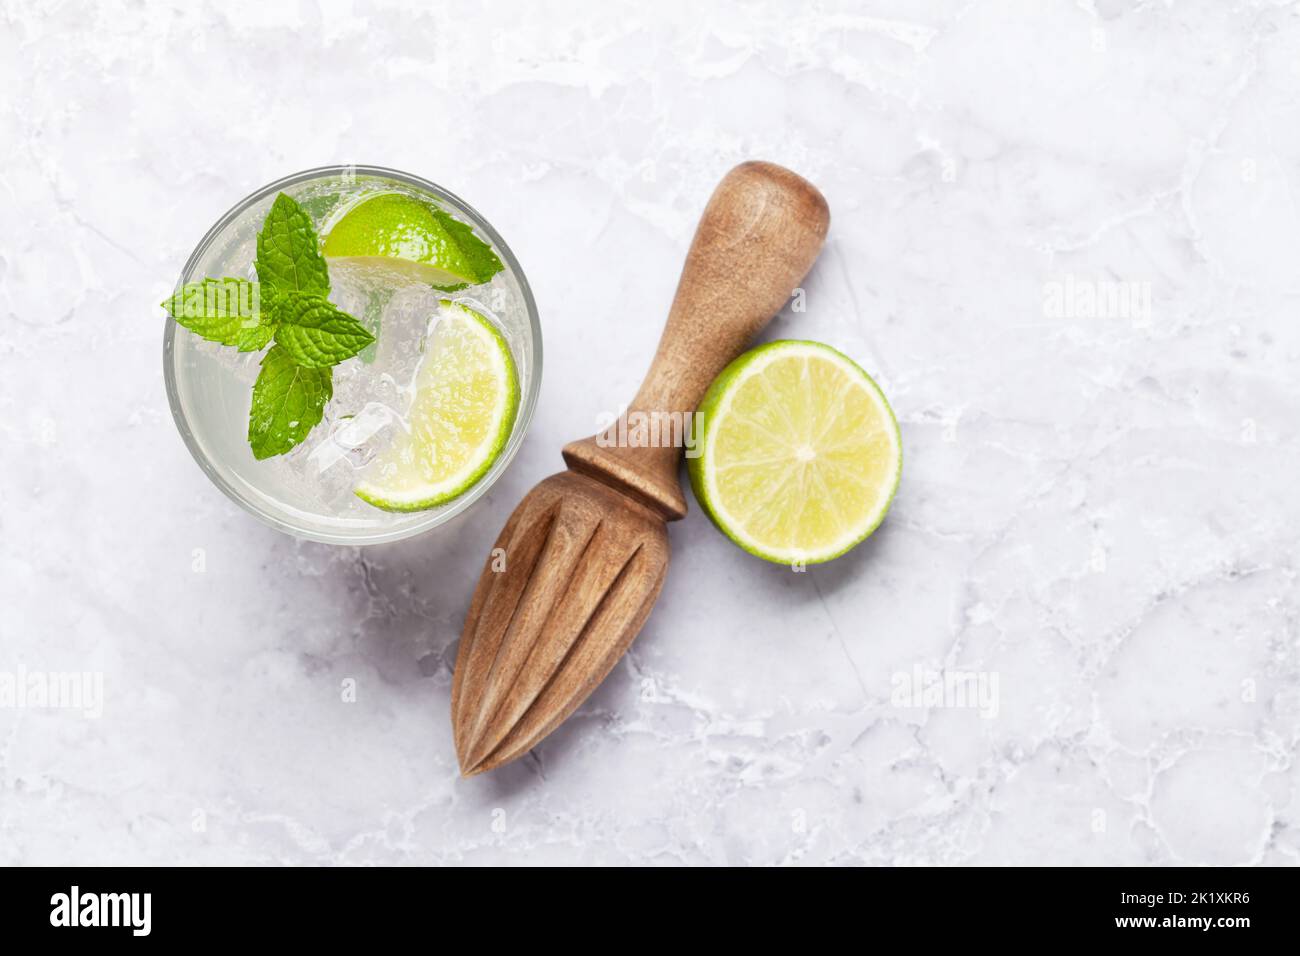 Mojito cocktail ingredients and drinks utensils. On stone table flat lay with copy space Stock Photo